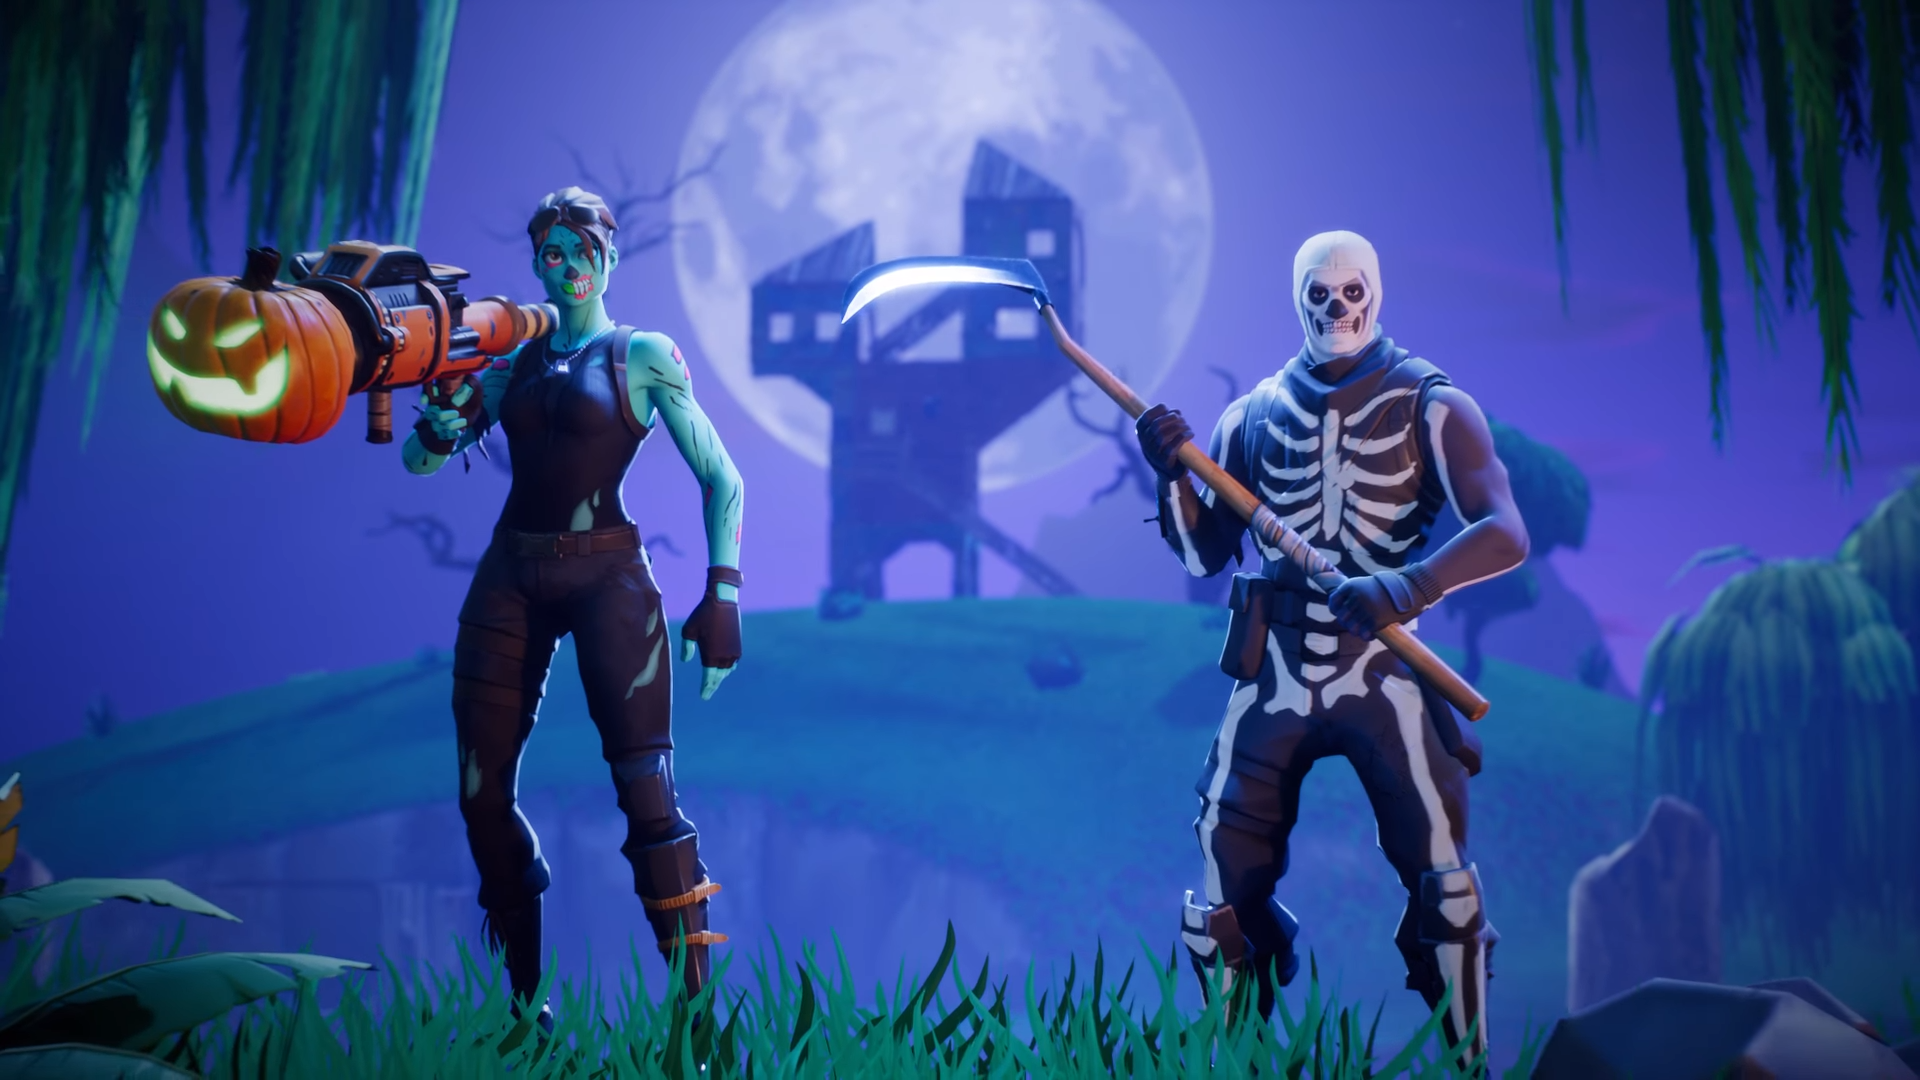 Fortnite's Popularity Has Drastically Increased In Recent ... - 1920 x 1080 png 1483kB